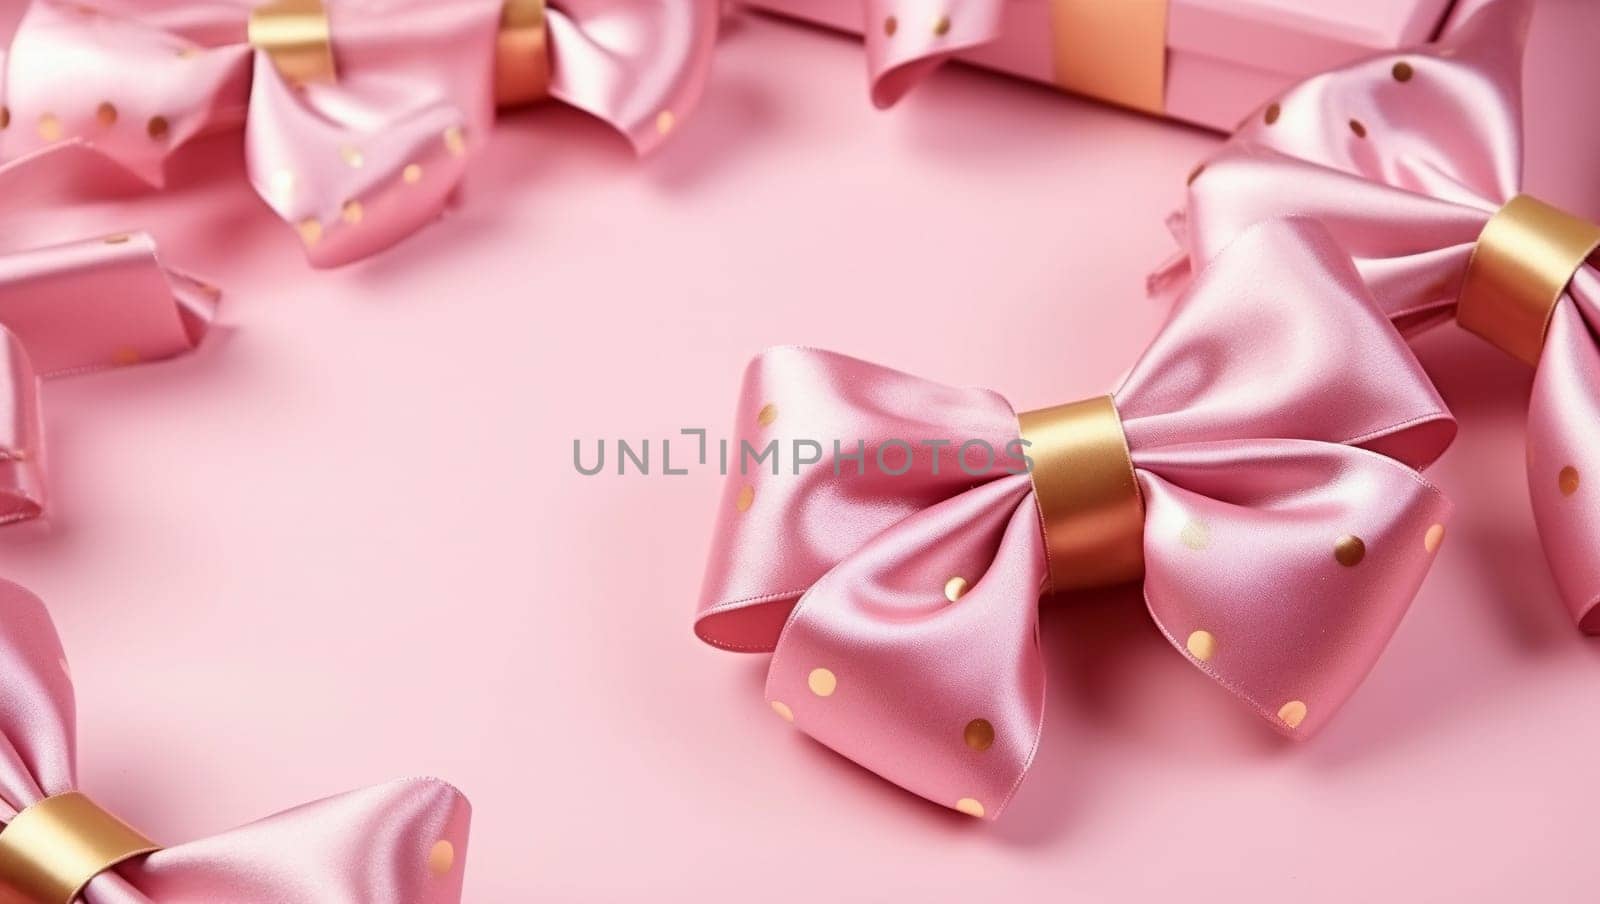 Gifts on pink background with gold ribbon. New Year's gifts or birthday gifts. by Sneznyj